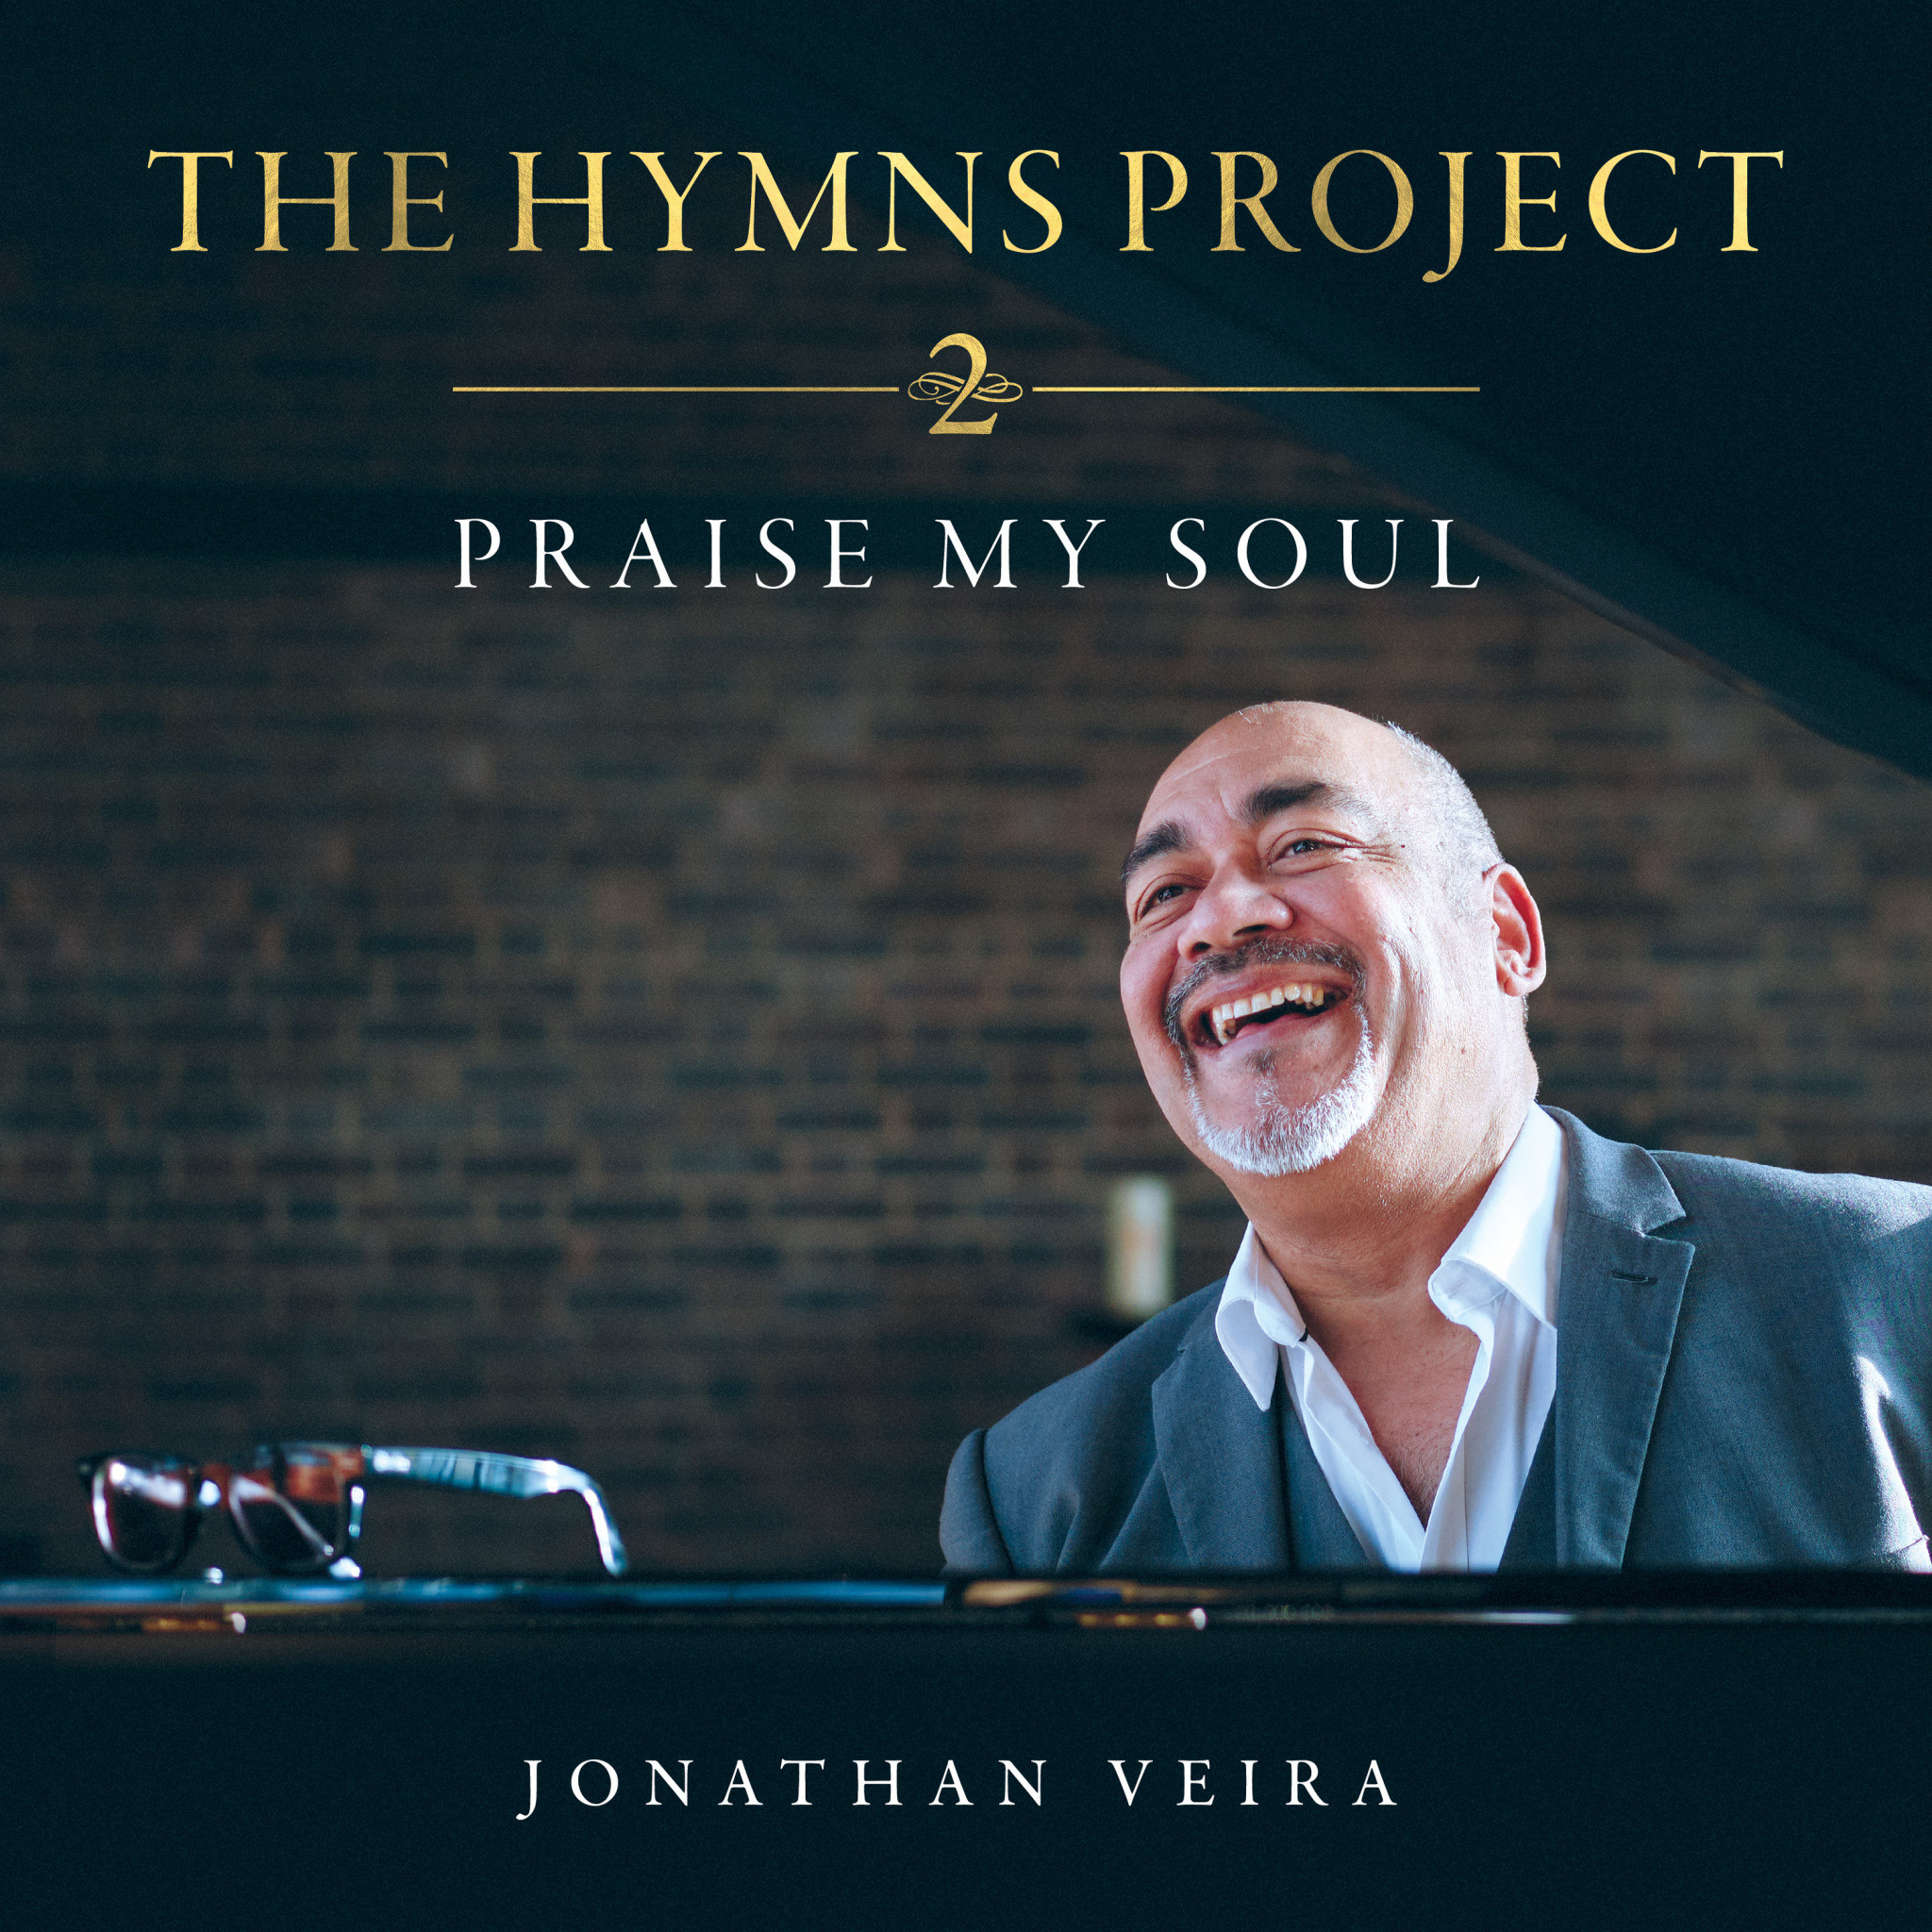 The Hymns Project 2 - Praise My Soul